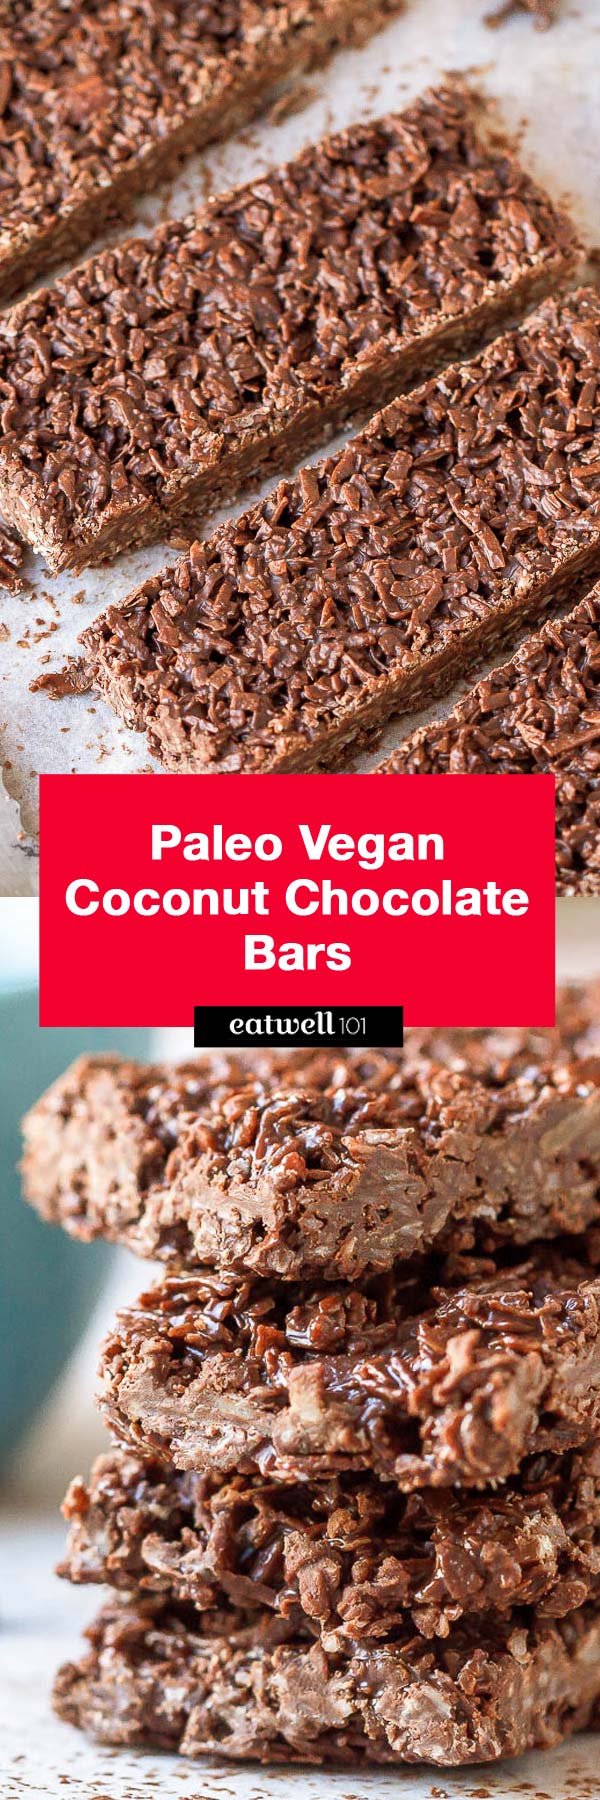 2-Ingredient Paleo Vegan Coconut Chocolate Bar - These deliciously indulgent bars are cheaper than storebought and take only 5 minutes to whip up! 